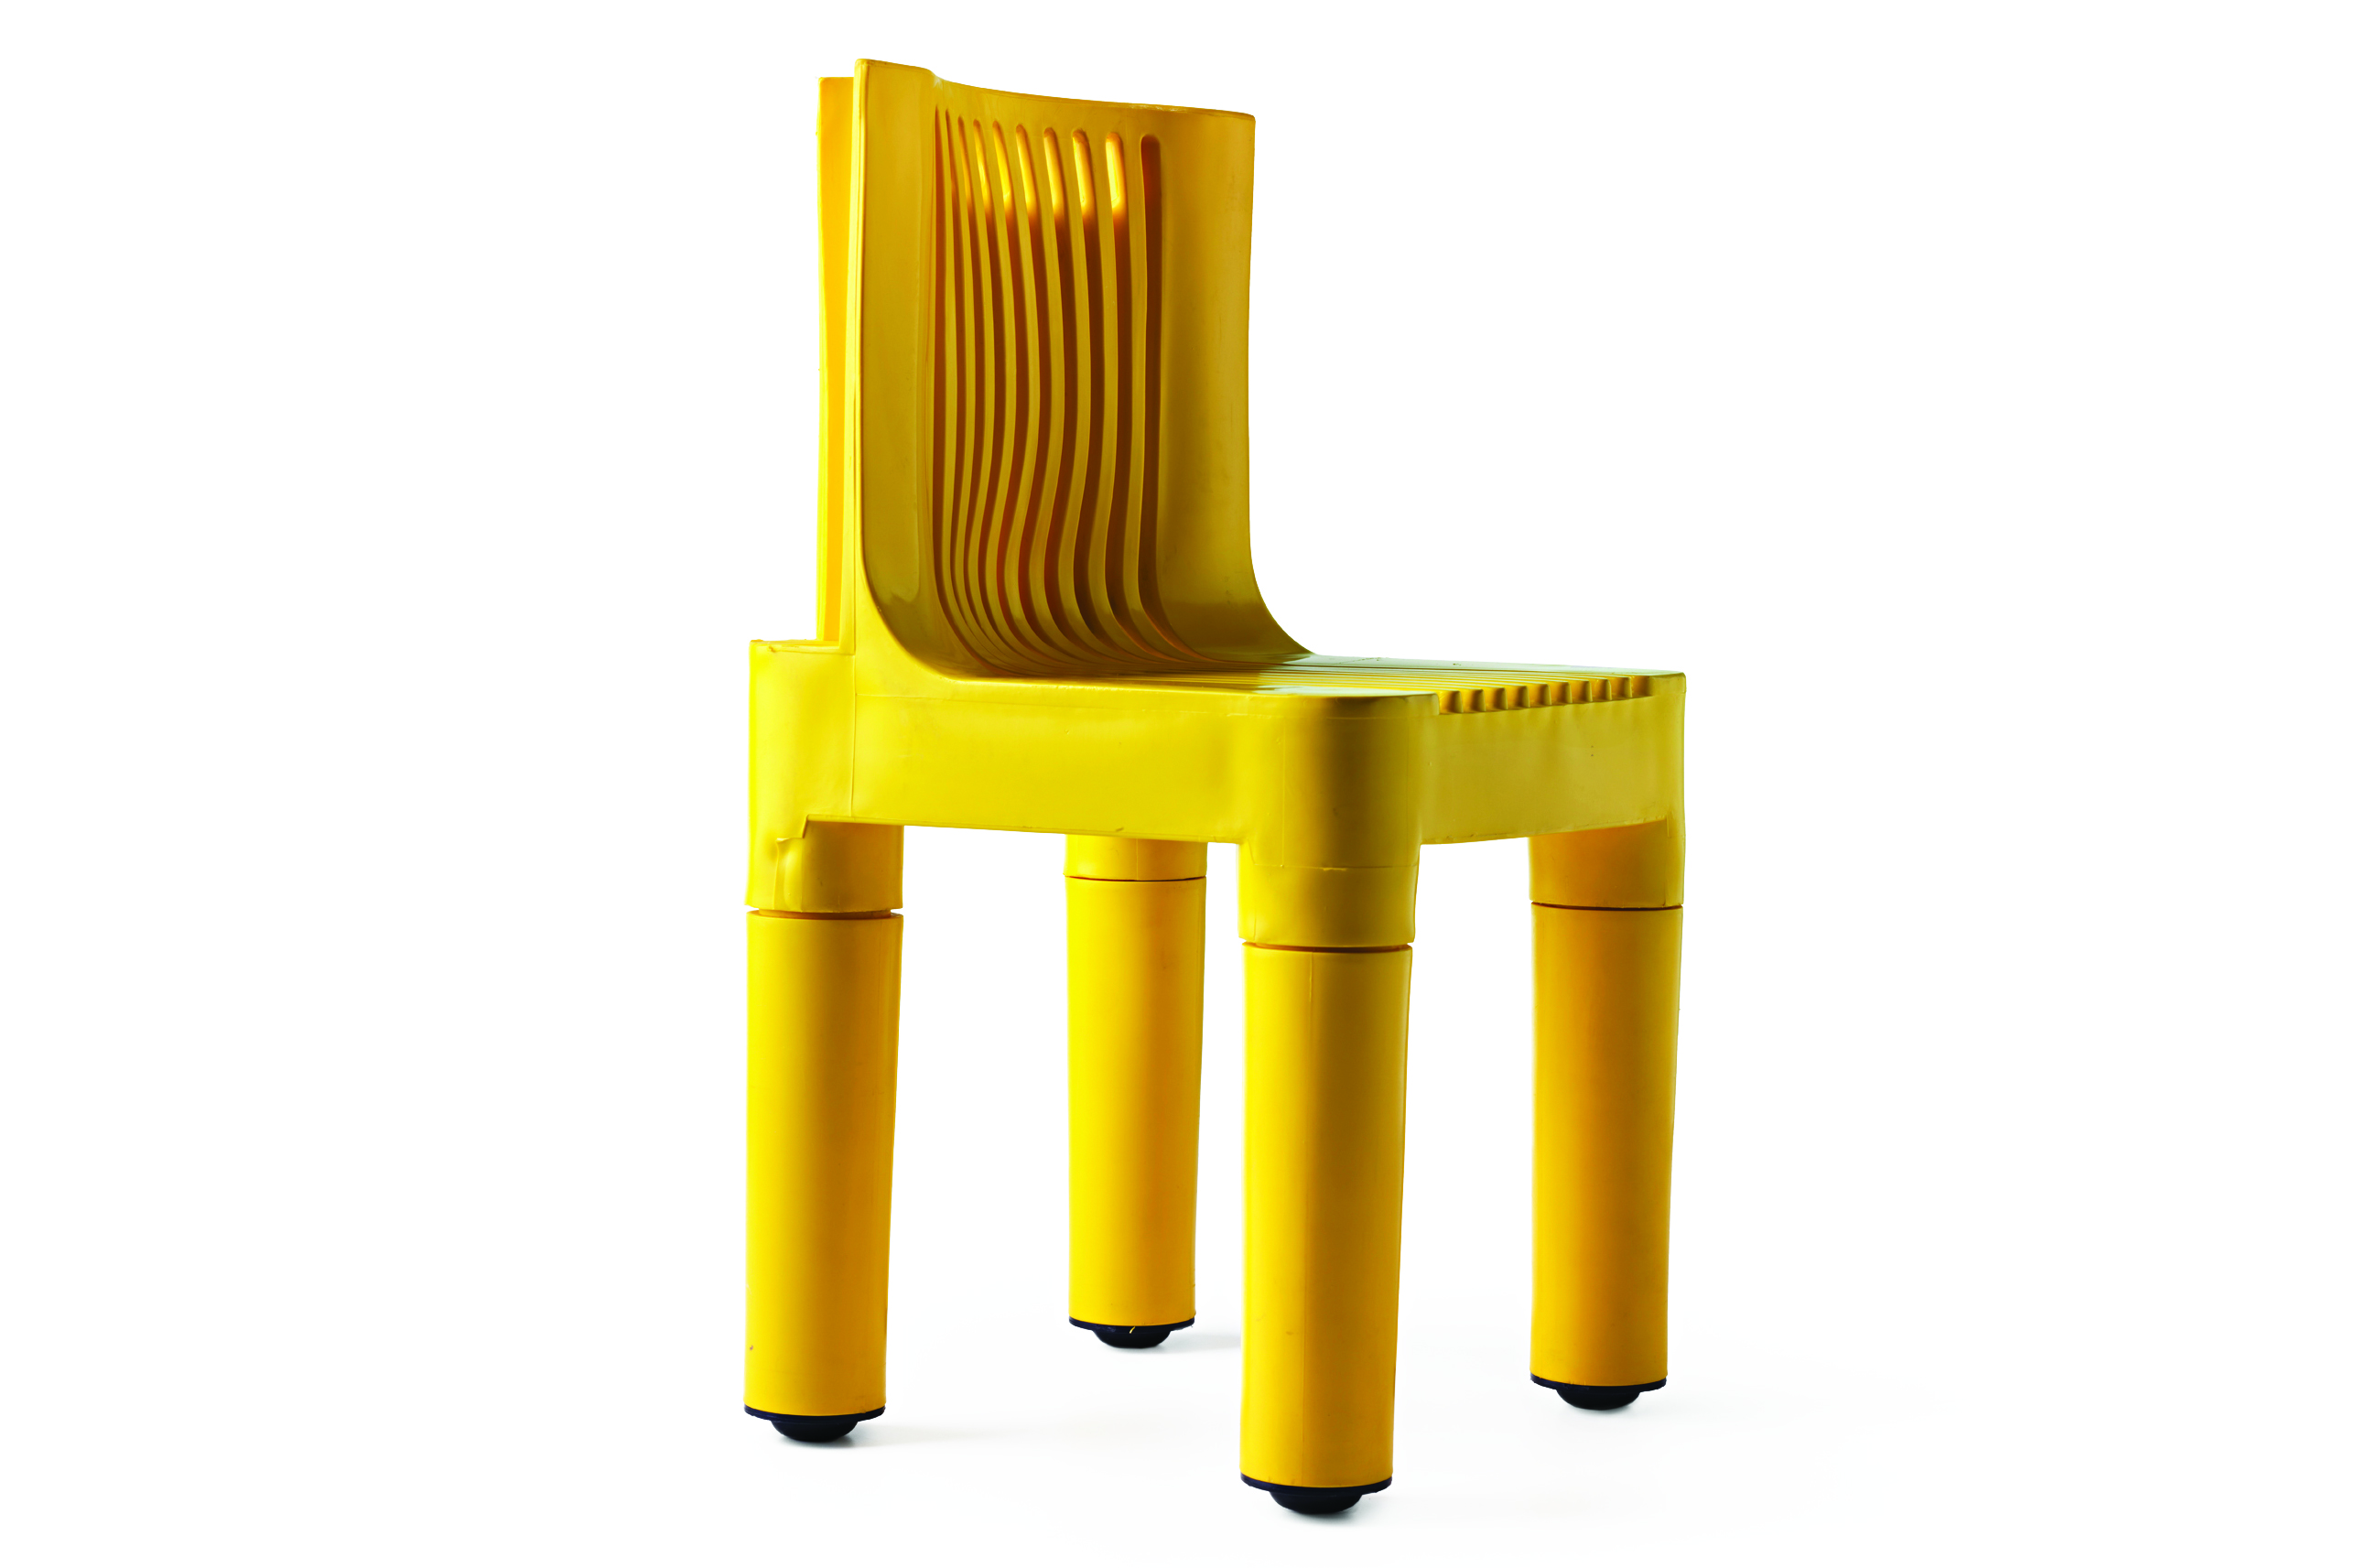 A yellow children's chair with a slatted back against a white background.